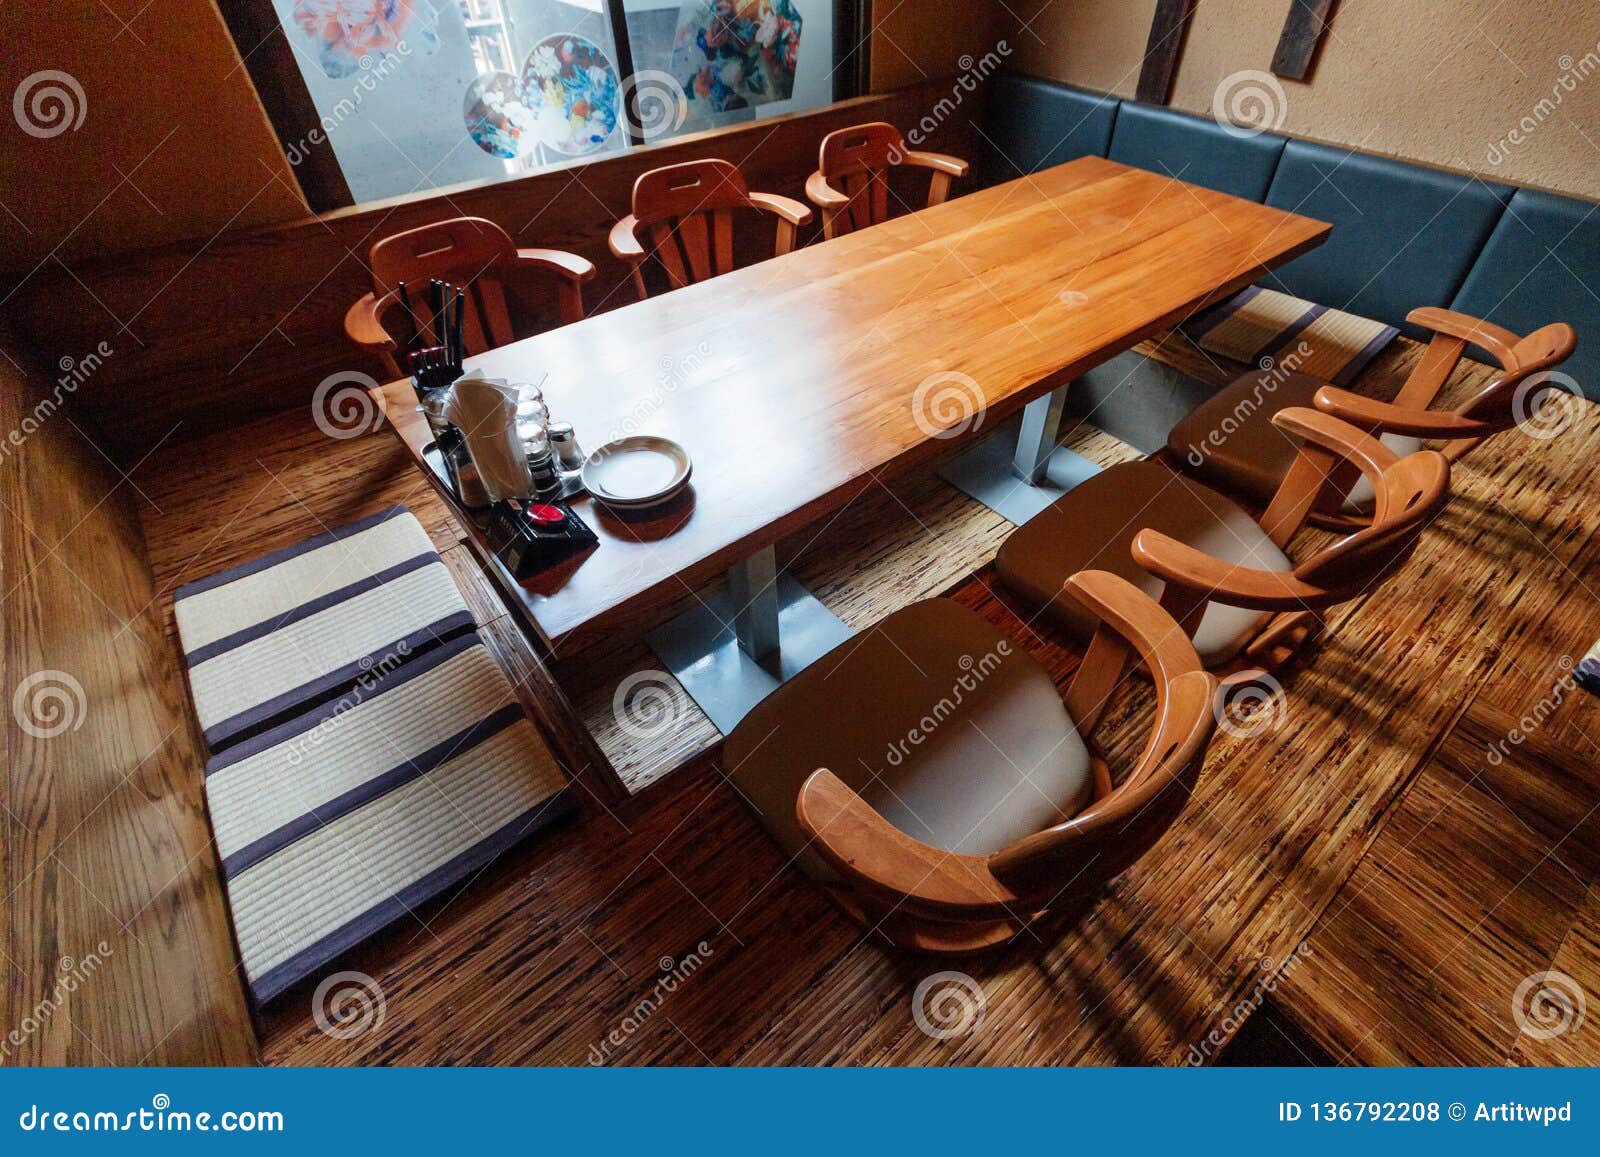 Japanese Style Ramen Restaurant Low Table In Center With Seats On